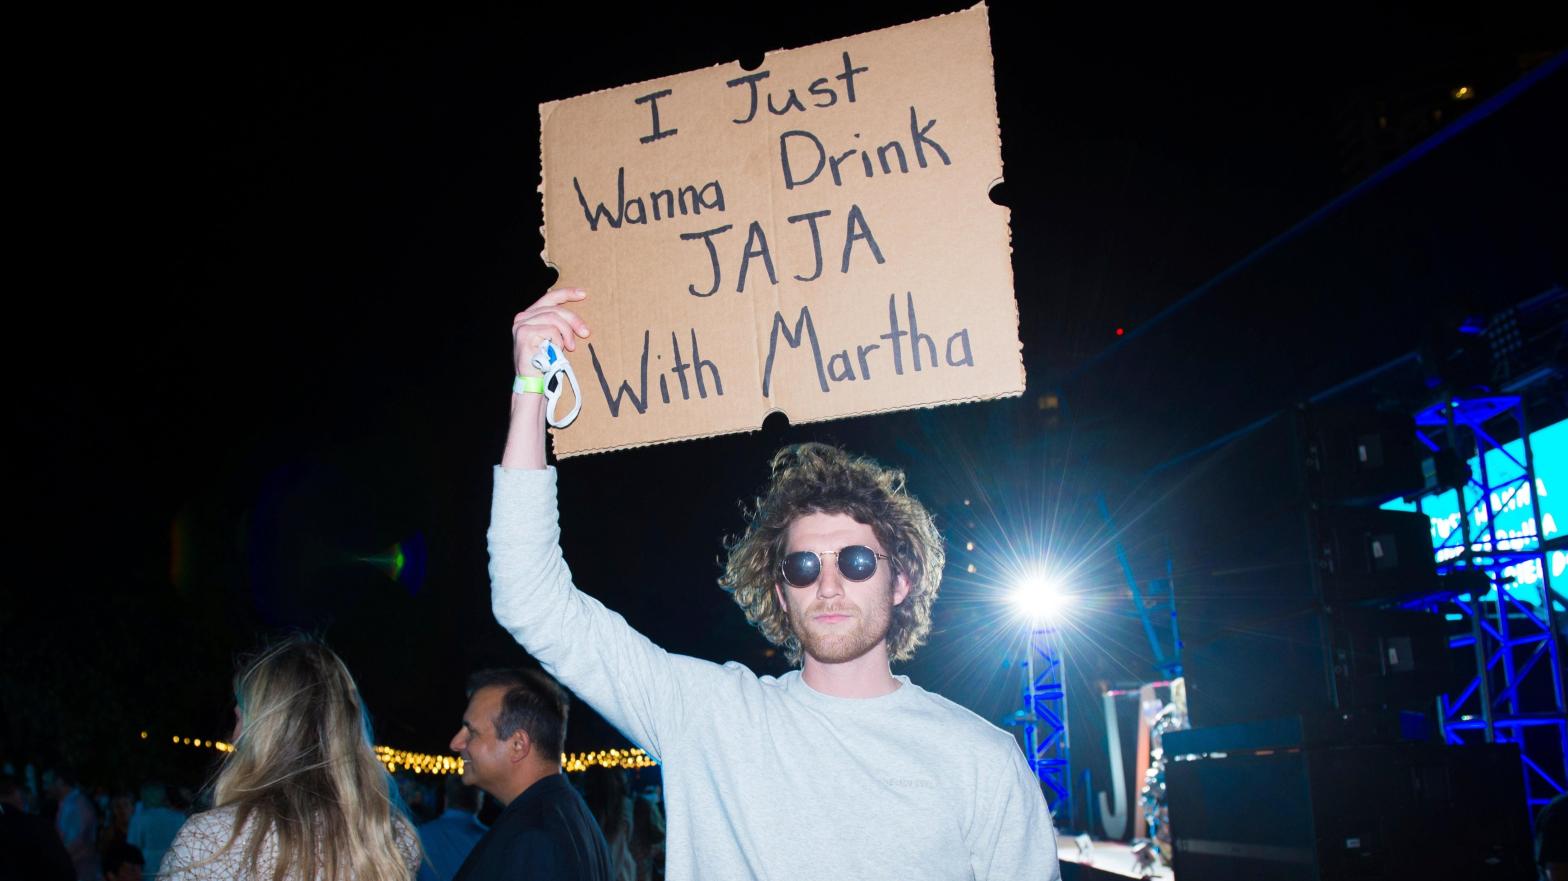 Seth Phillips, AKA Dude With Sign, in 2021. (Image: Scott Roth, AP)